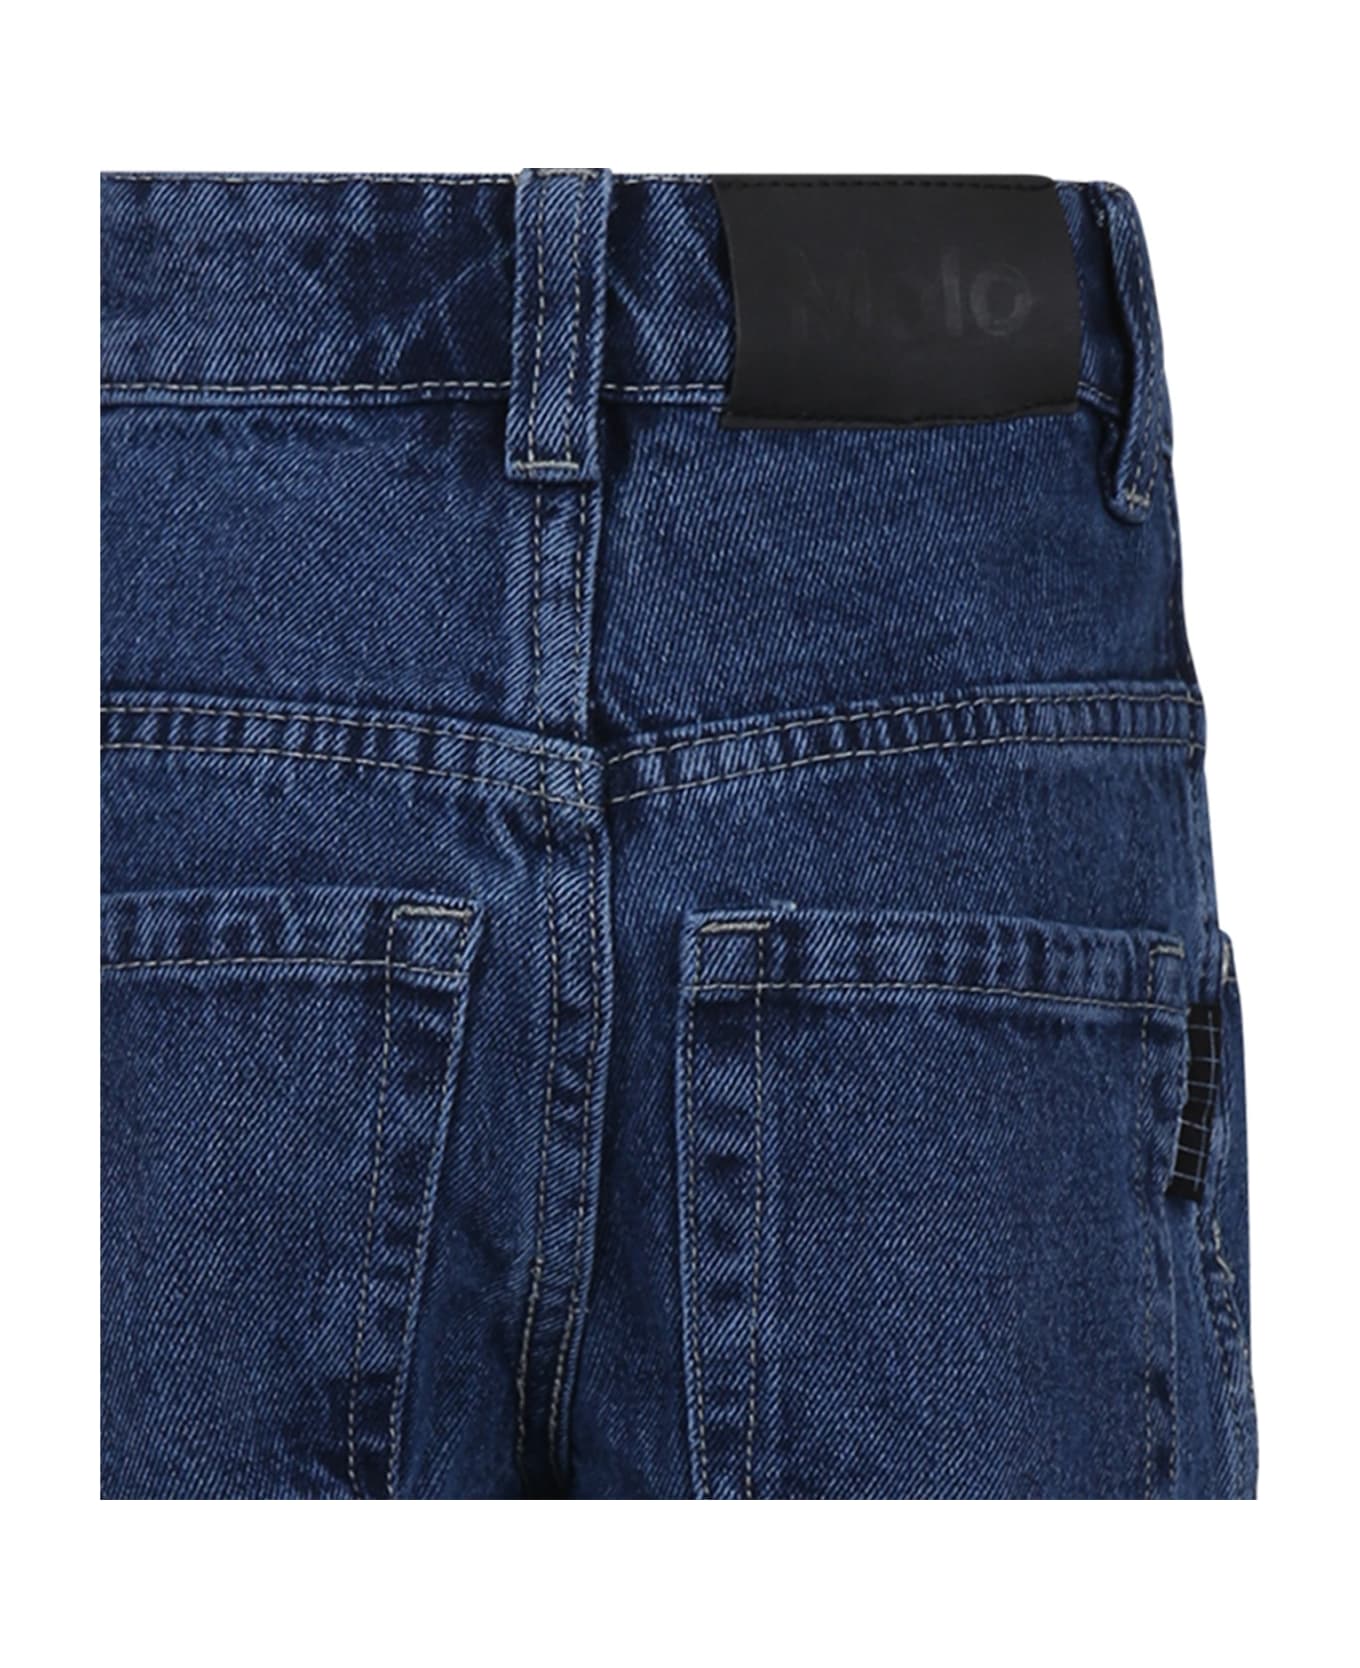 Molo Blue Jeans For Boy With Logo - Denim